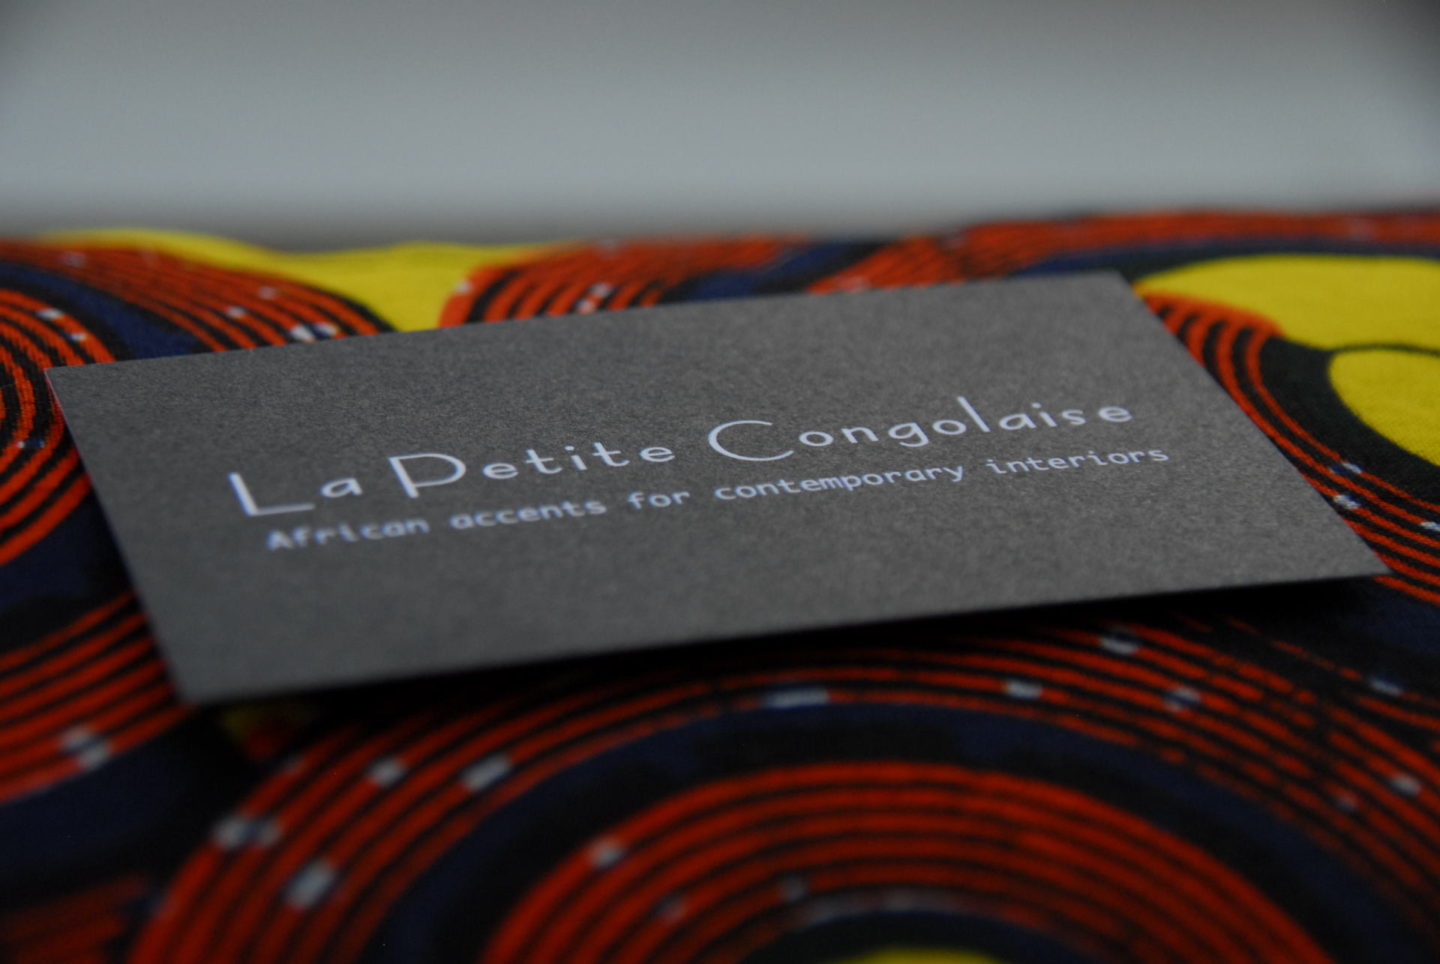 In Conversation with Laurence of 'La Petite Congolaise'